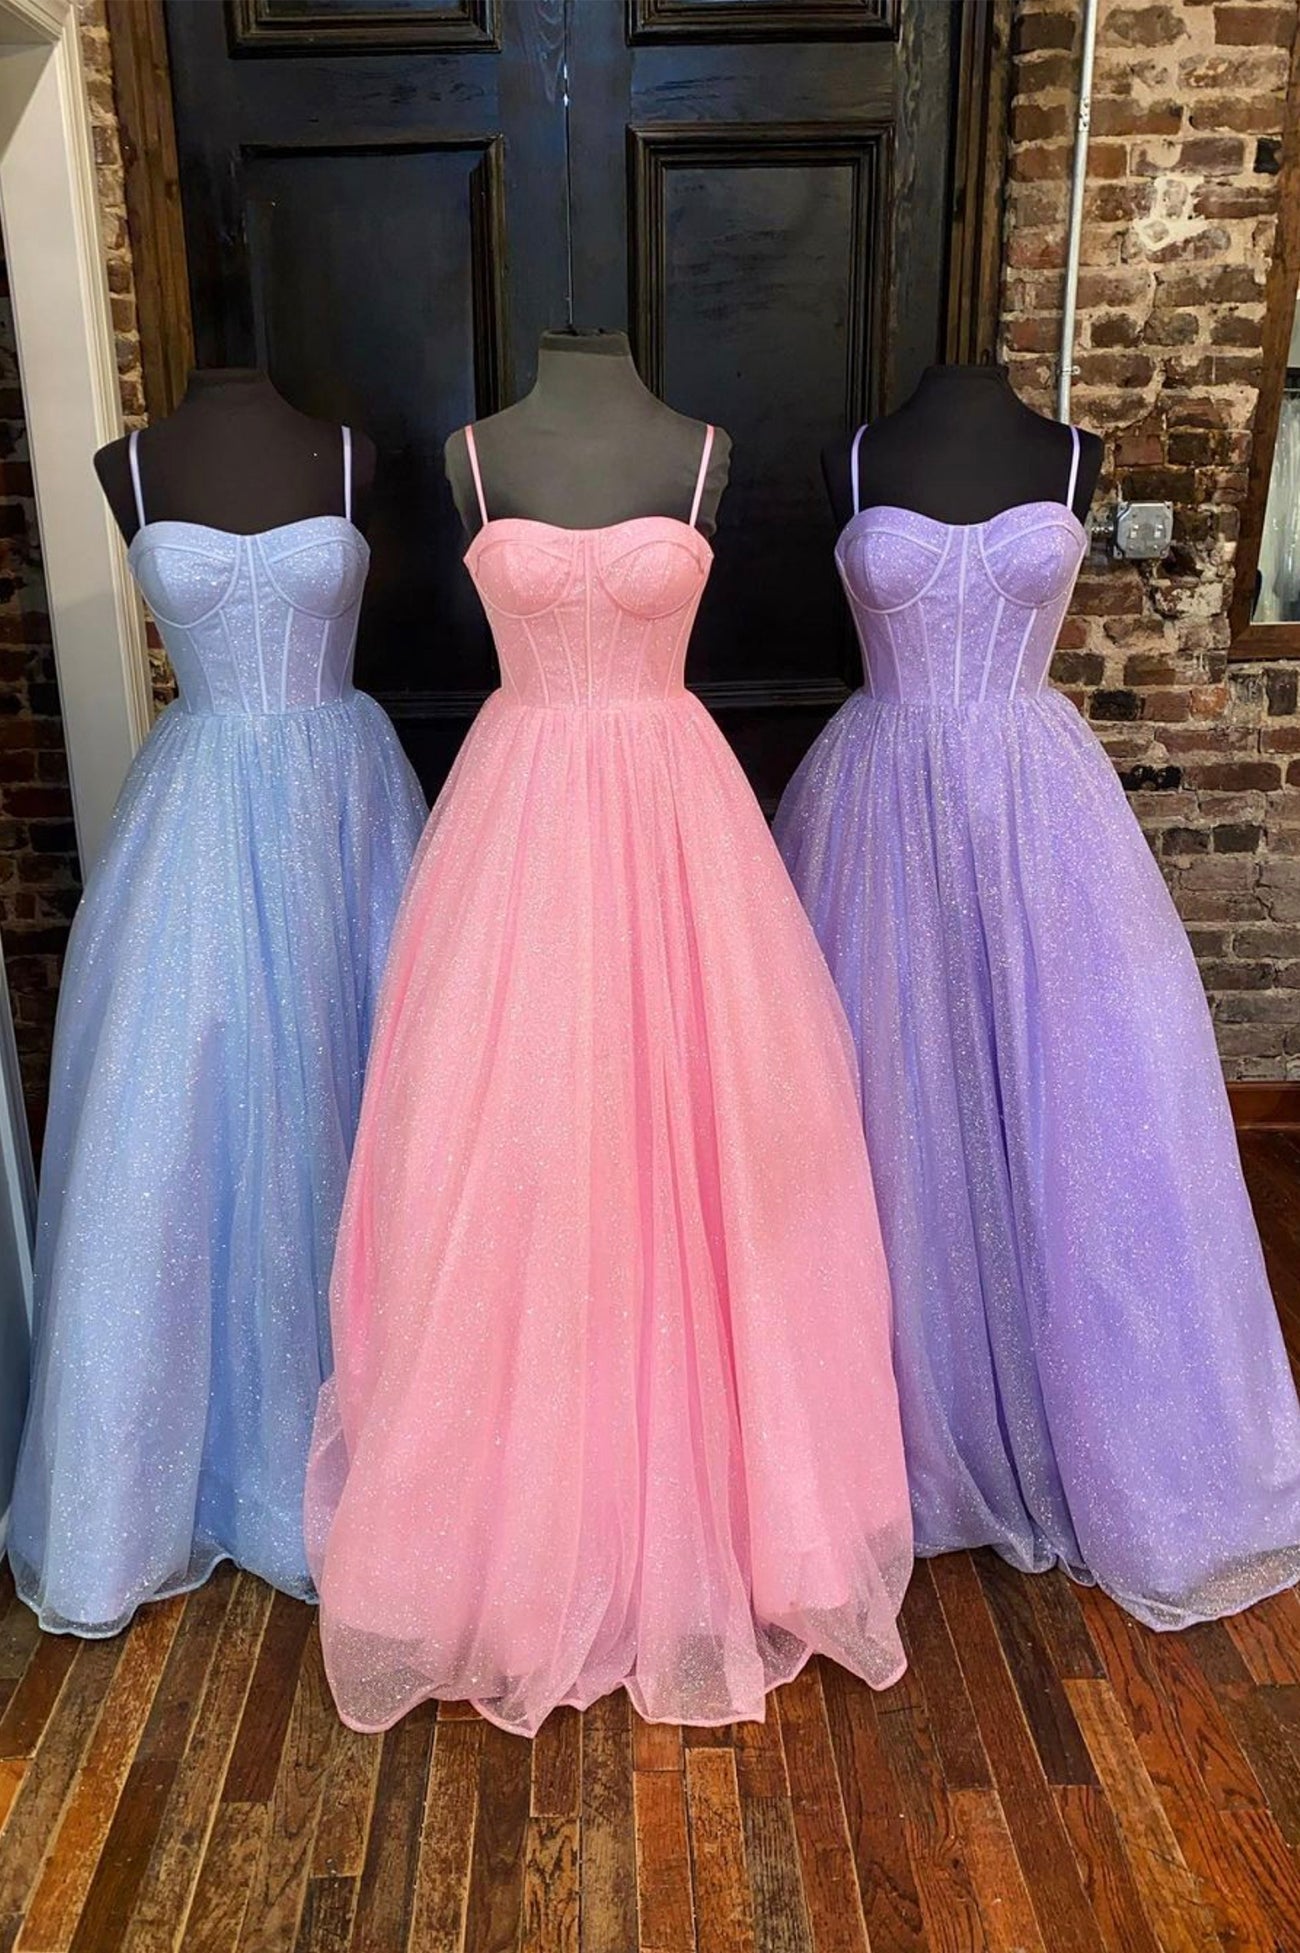 Lovely Tulle Spaghetti Strap Long Corset Prom Dresses, A-Line Evening Dresses outfit, Bridesmaid Dress Colorful